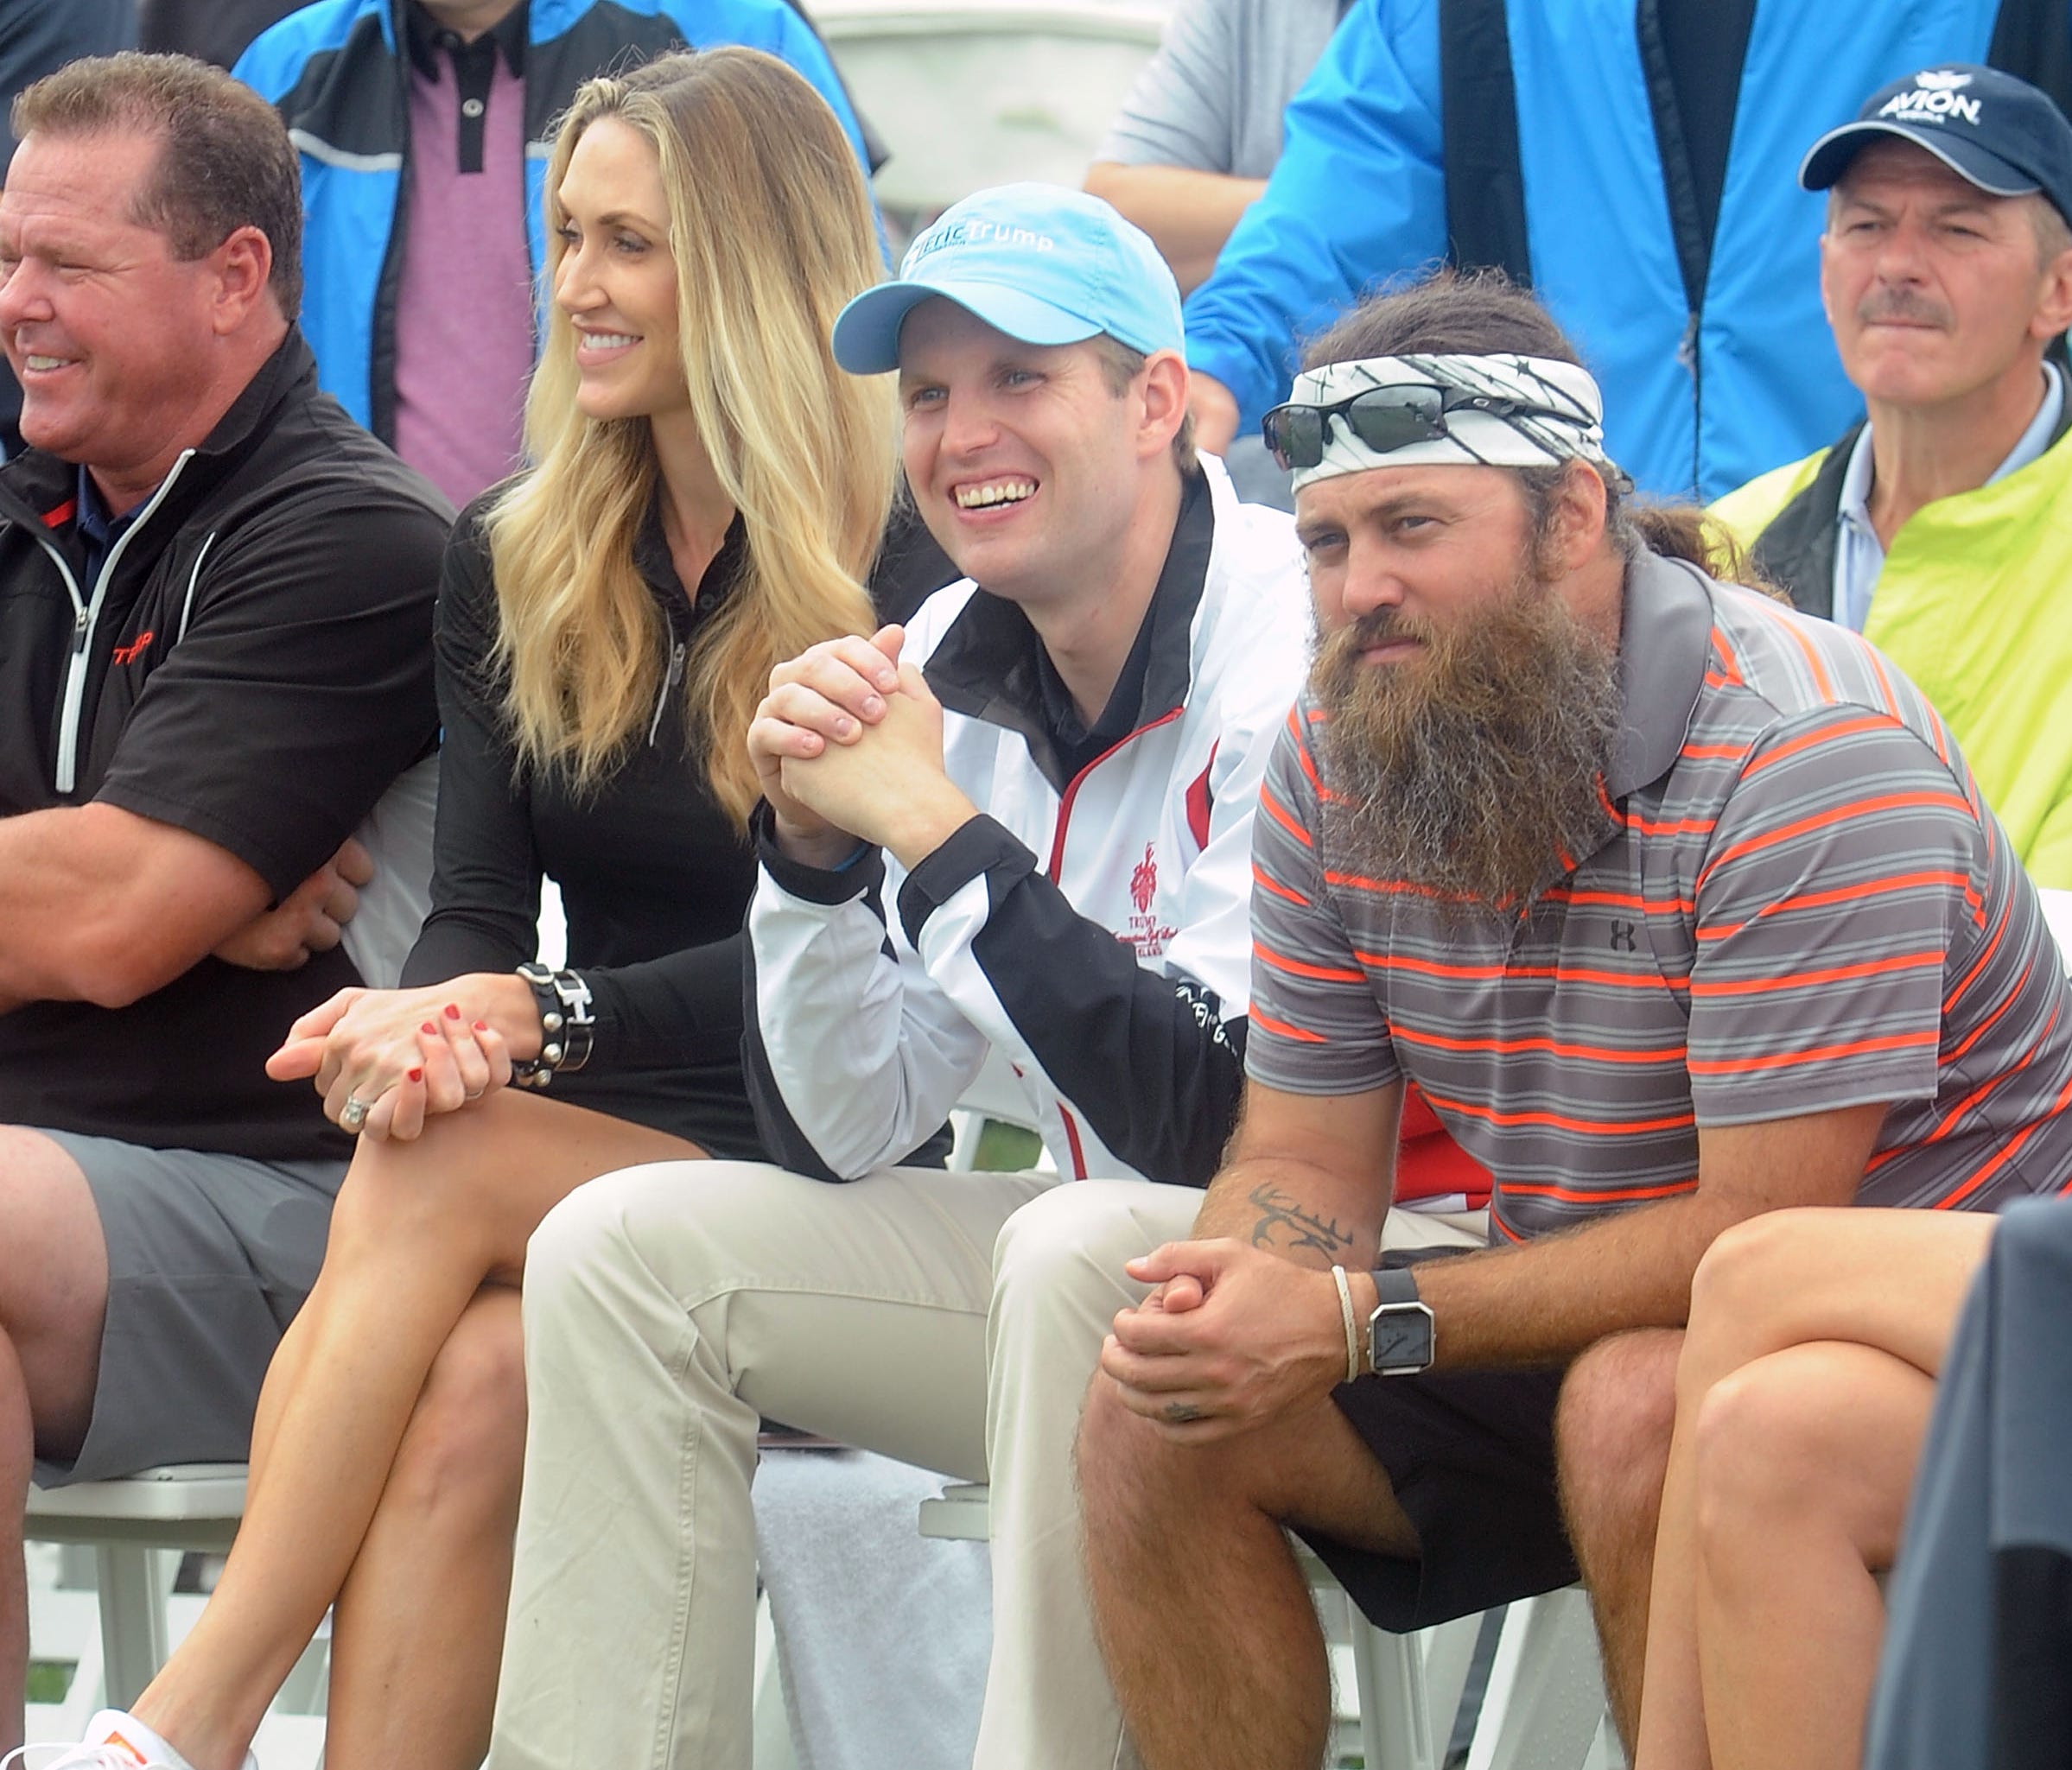 Lara Trump, Eric Trump and Willie Robertson attend the 10th Annual Eric Trump Foundation Golf Invitational at Trump National Golf Club Westchester on Sept. 19, 2016 in Briarcliff Manor, N.Y.